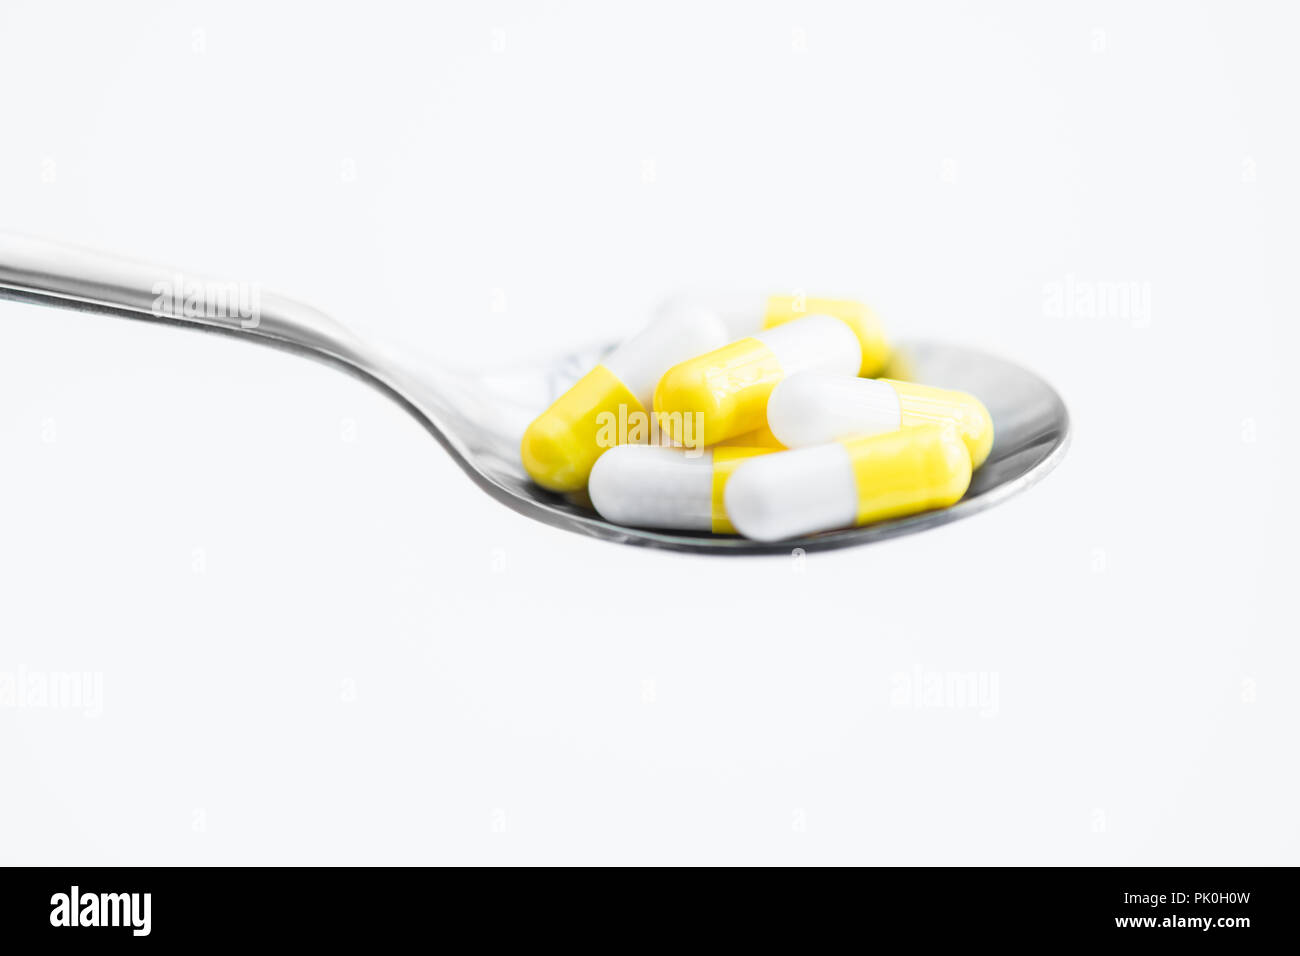 Spoonful of Pills Stock Photo